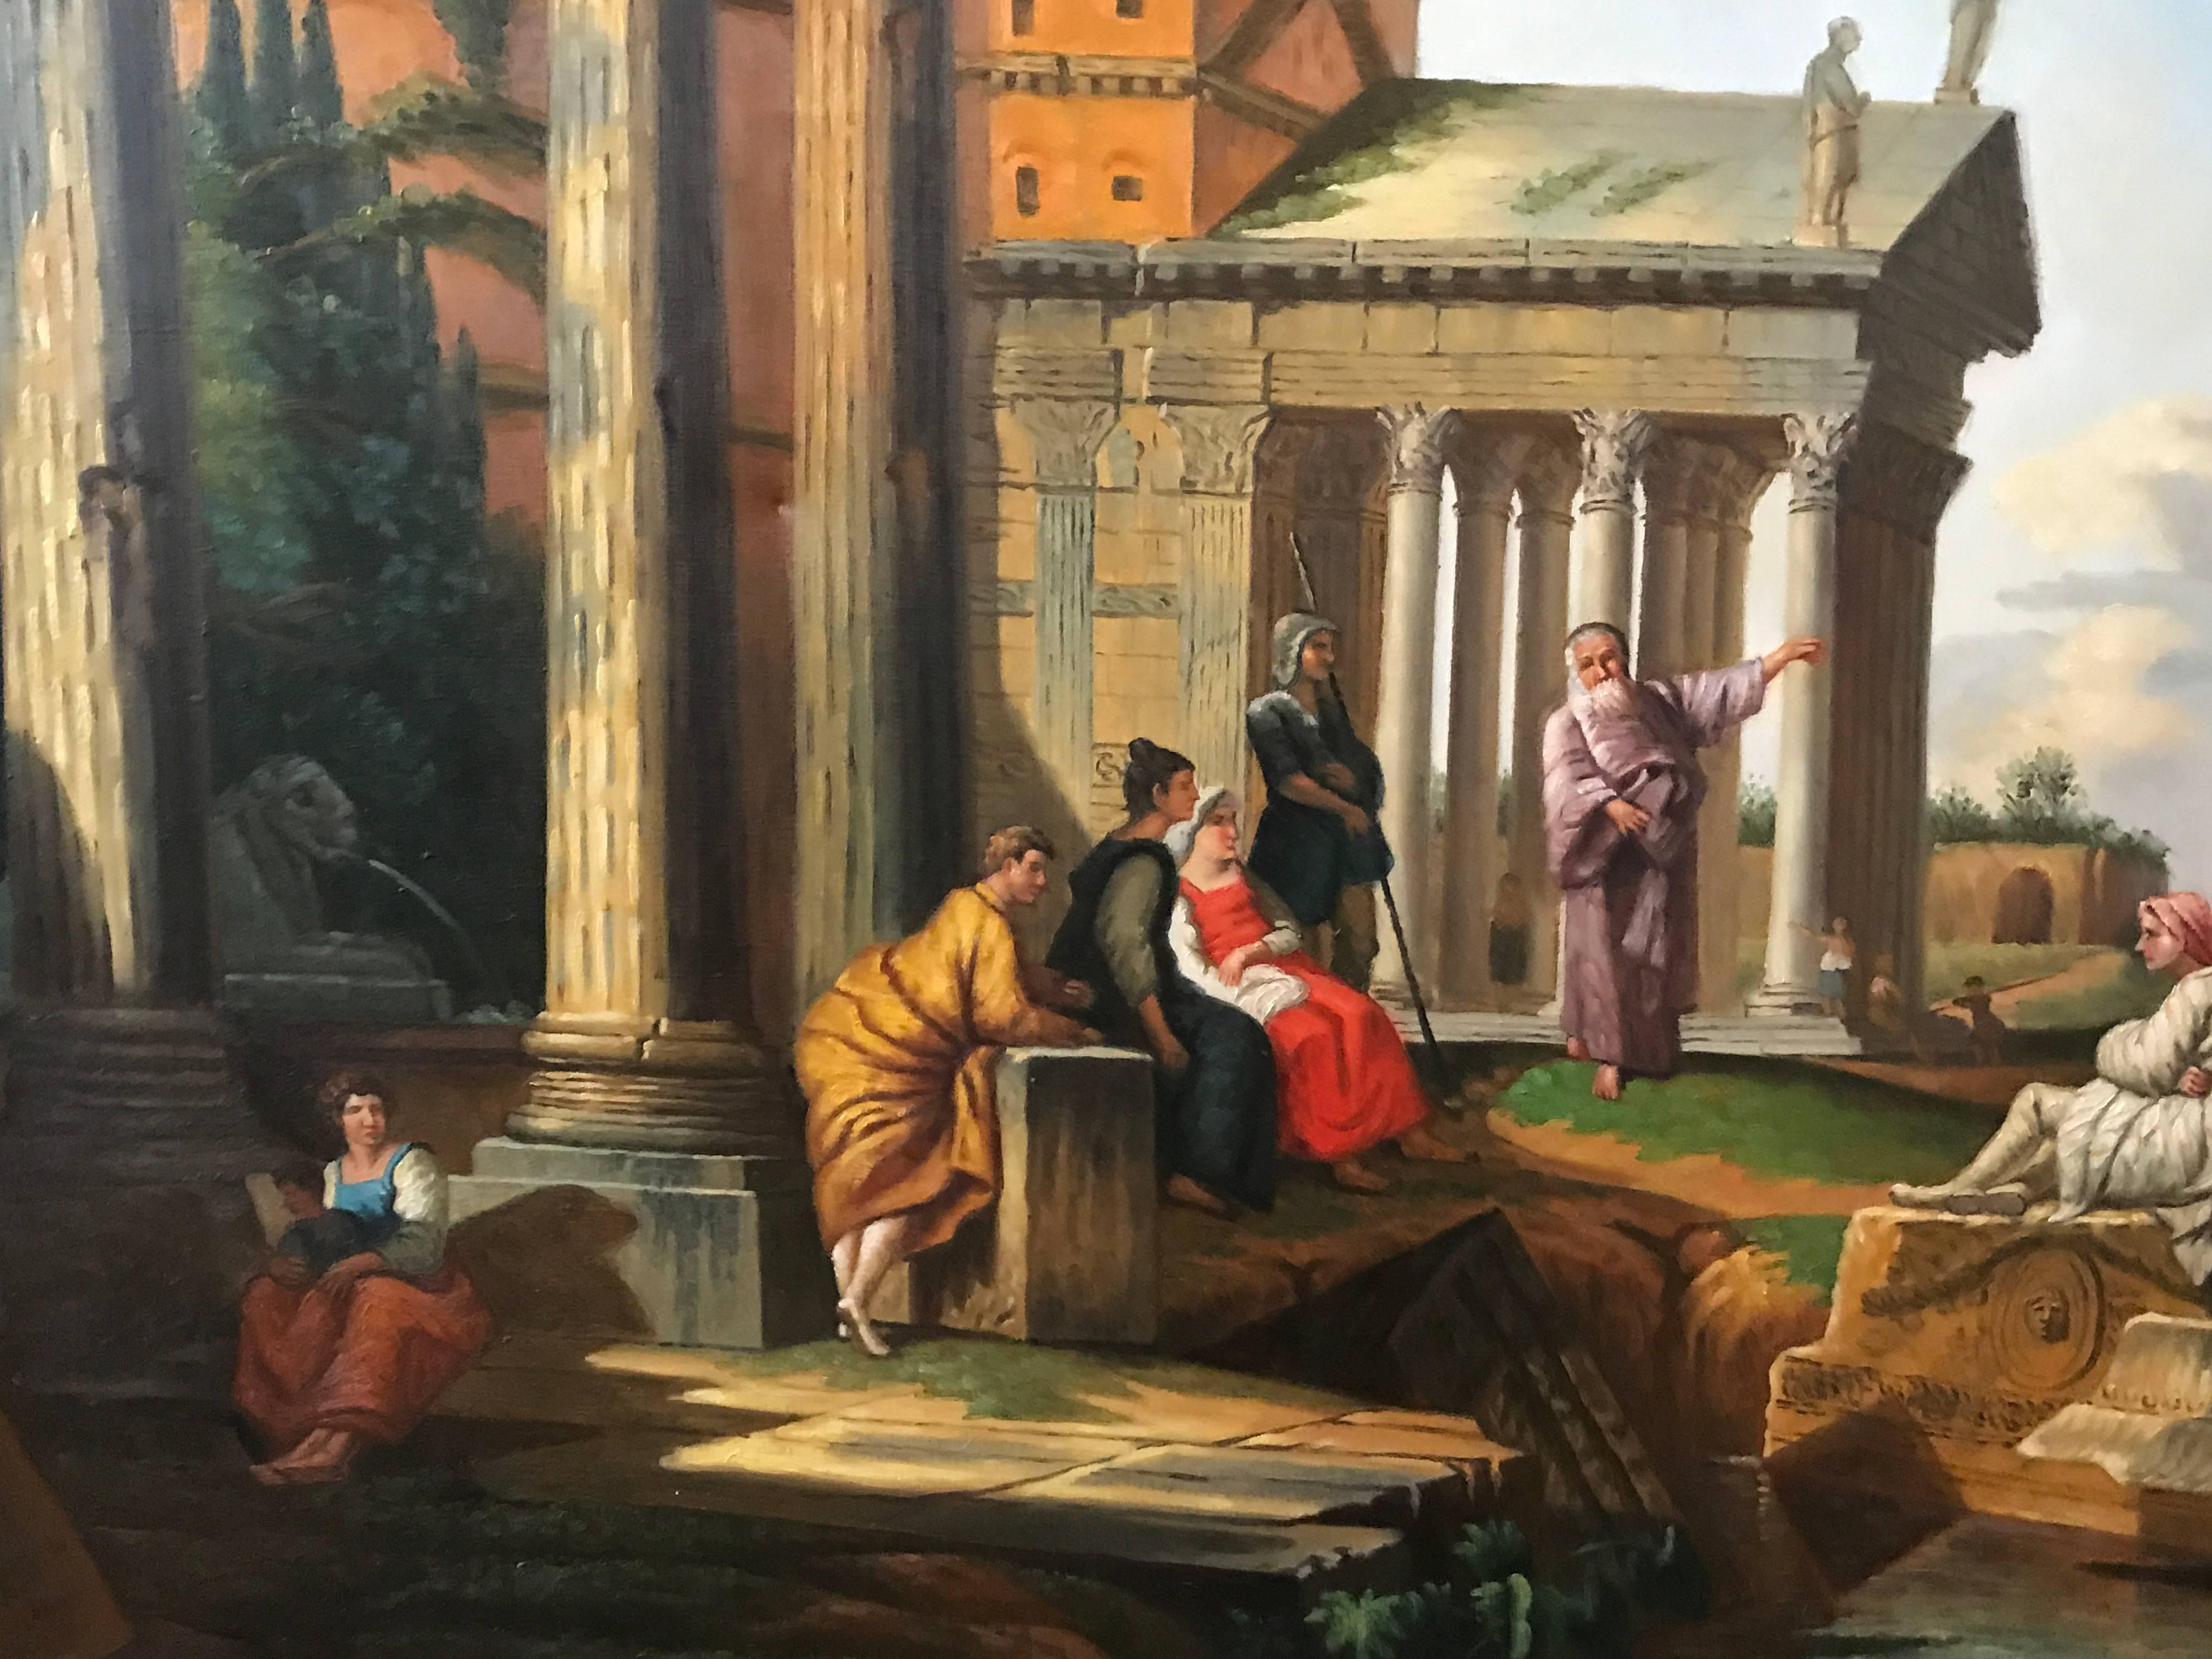 Absolutely stunning classical Roman architectural scene oil painting on canvas - painted on a huge exhibition scale. 

The painting depicts these ancient classical Roman ruins amidst an Arcadian landscape, with various figures seated amongst the